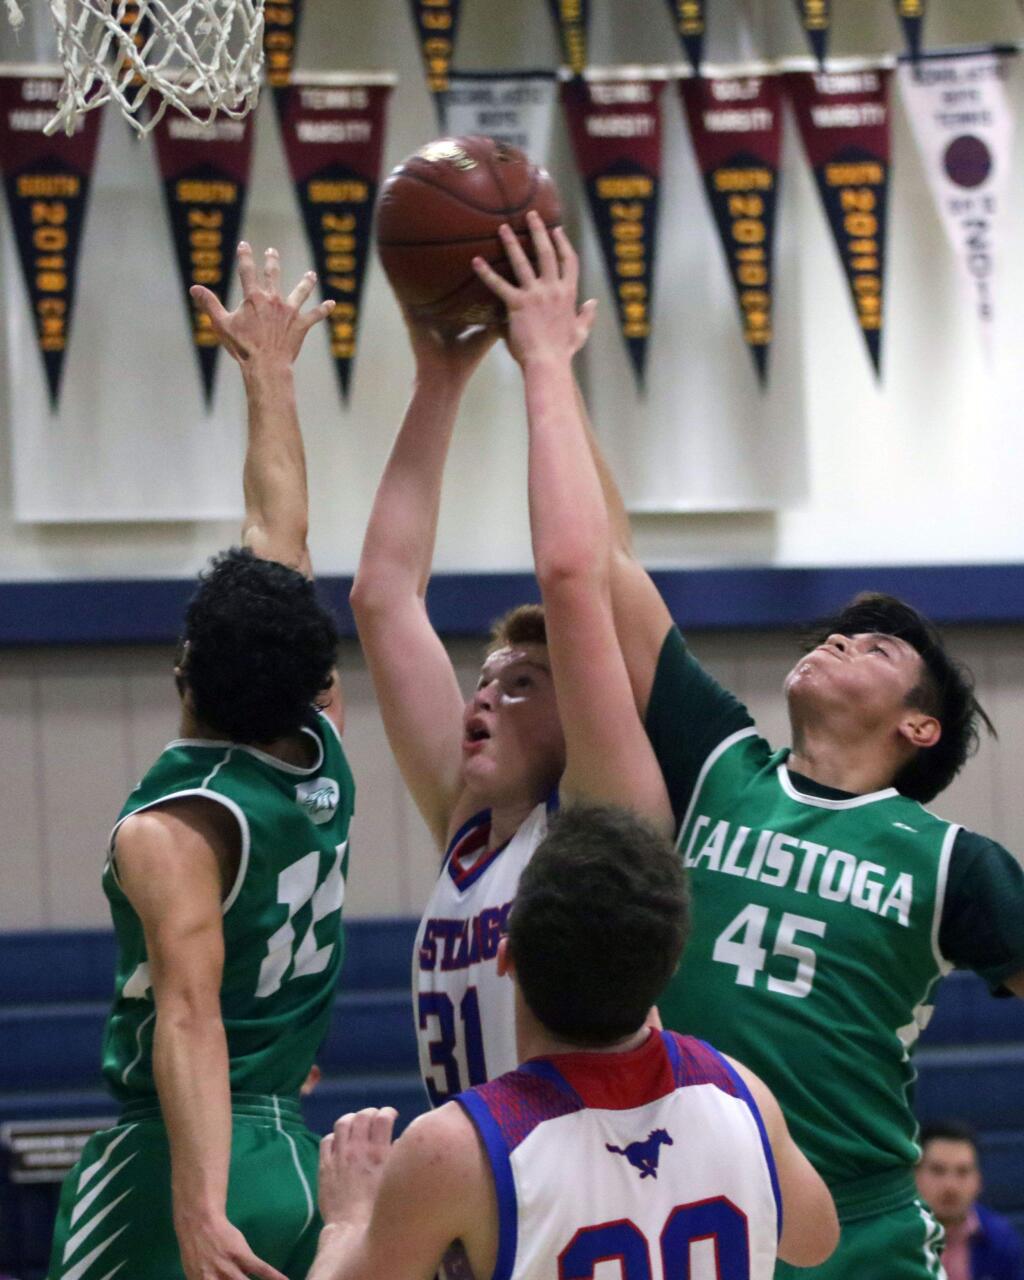 DWIGHT SUGIOKA/FOR THE ARGUS-COURIERTyler Pease goes up for a St. Vincent basket over a pair of Calistoga defenders in the Mustangs' 42-25 victory.